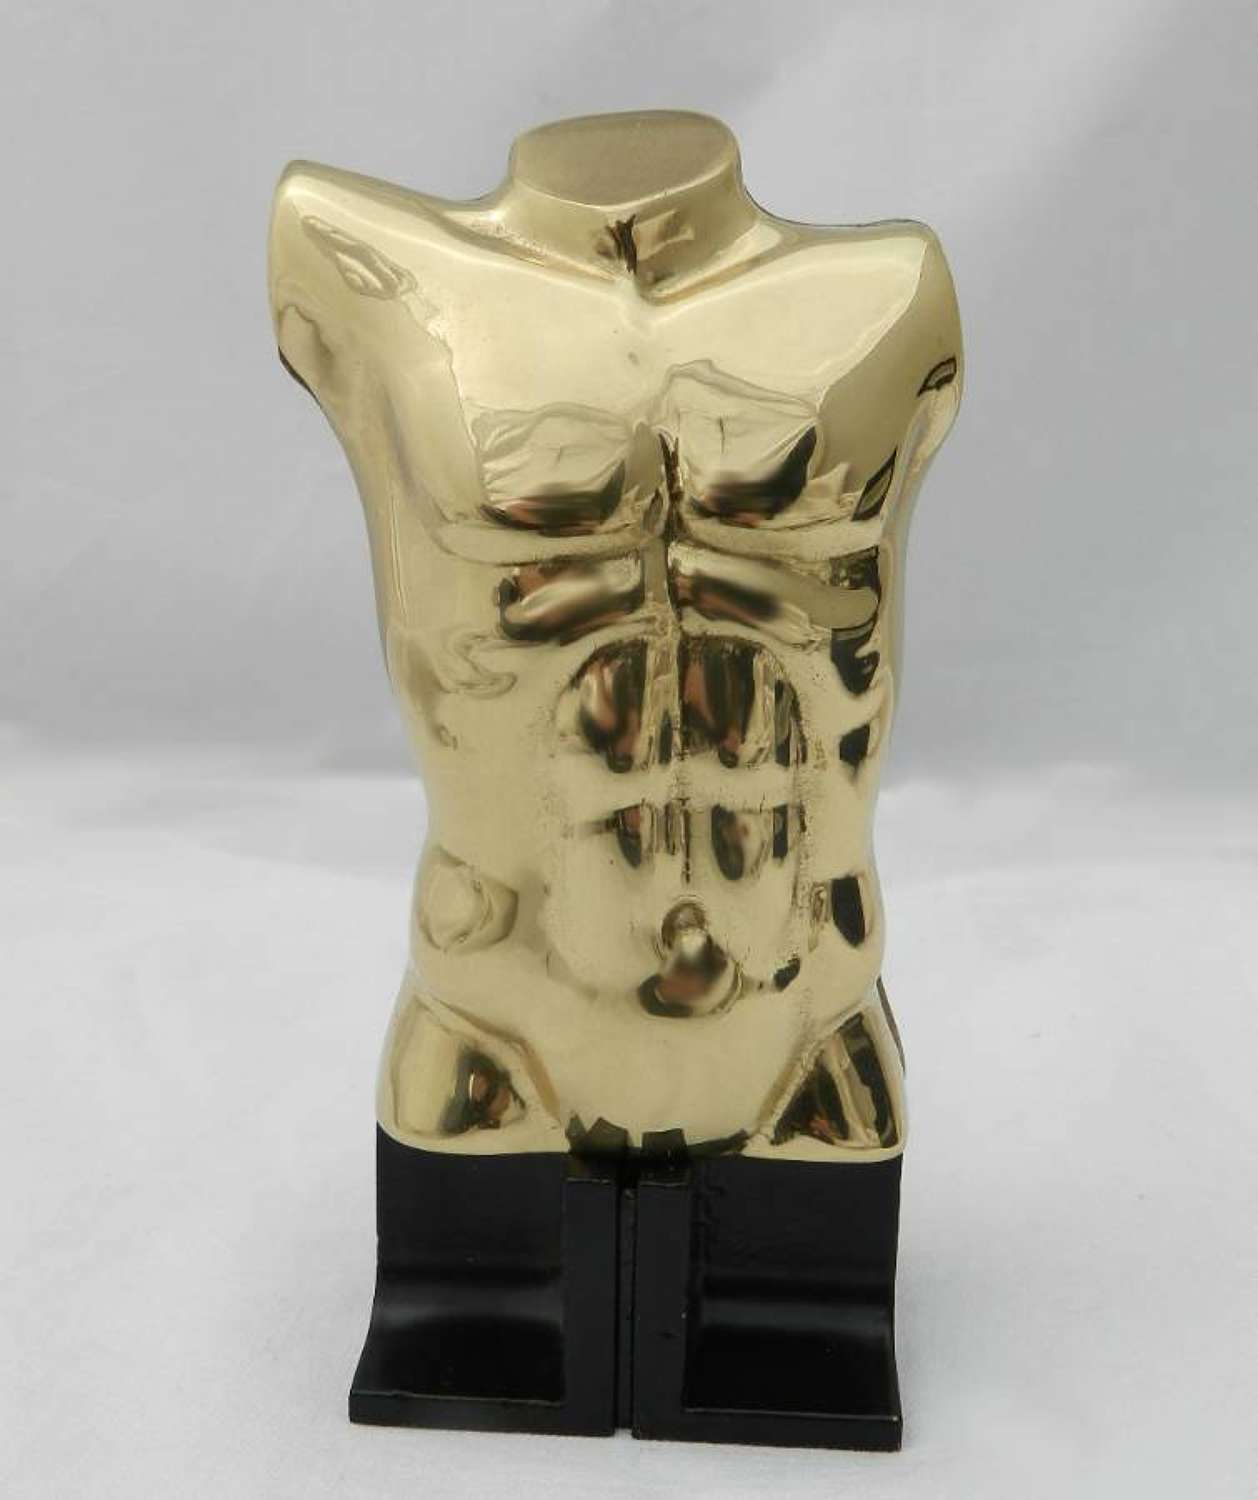  Torso Epigastrique Opus 377 1989 Nude Male by Miguel Ortiz Berrocal Sculpture signed and numbered in box with certificate